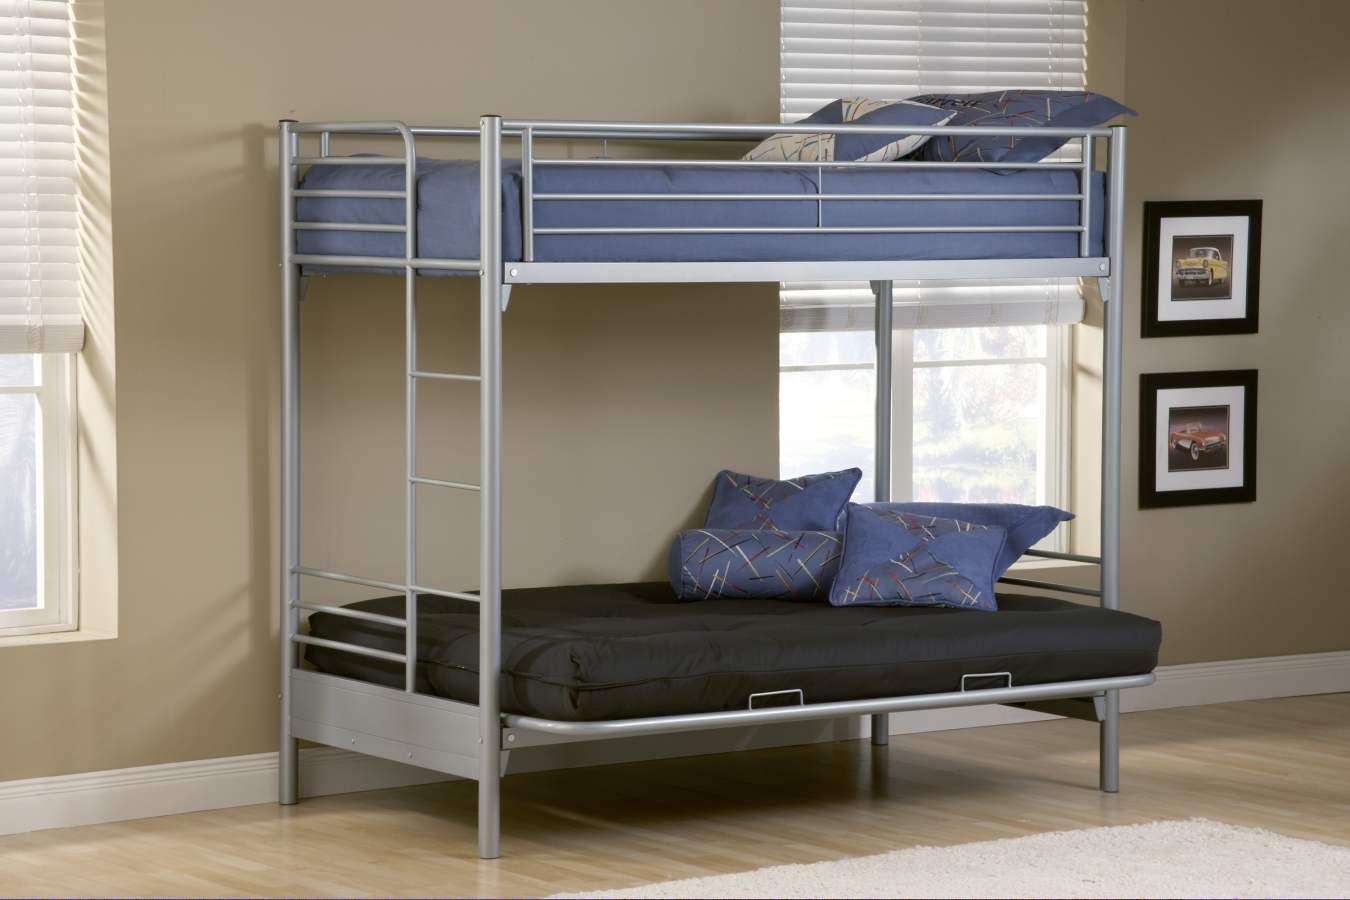 Heavy Duty Bunk Beds Visualhunt, Valerie Full Over Full Bunk Bed